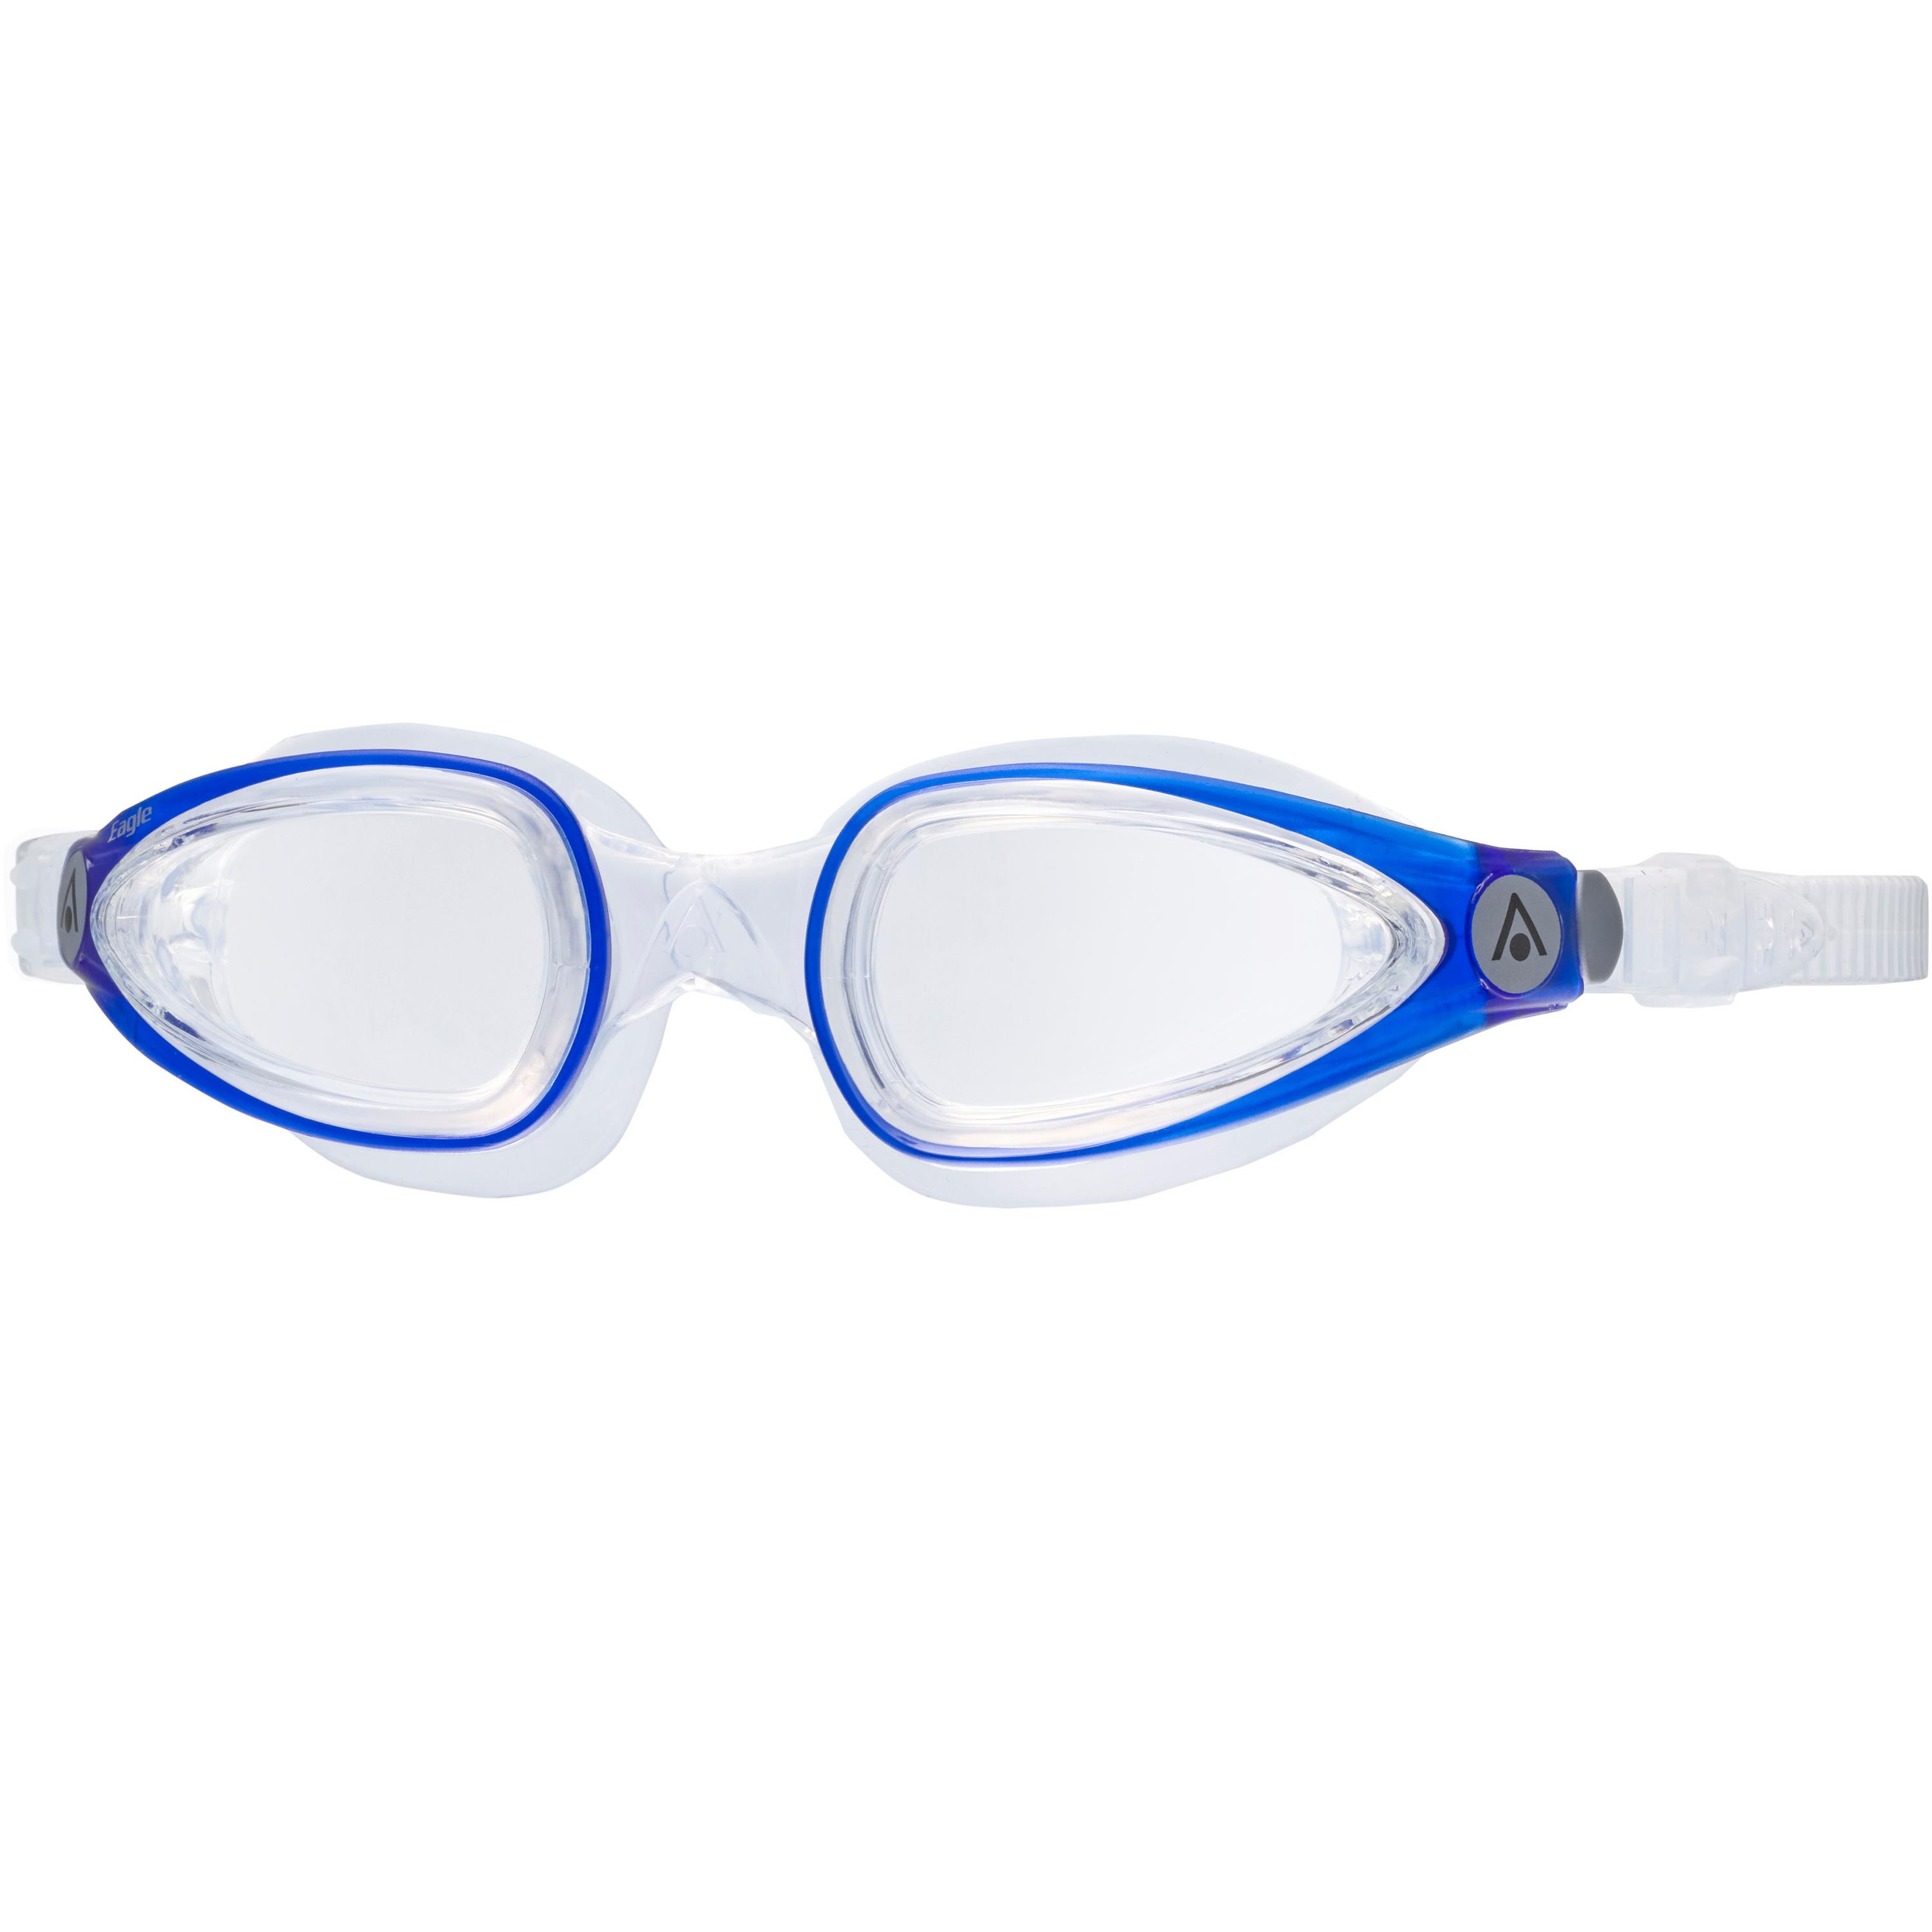 Image of Aquasphere EAGLE Schwimmbrille